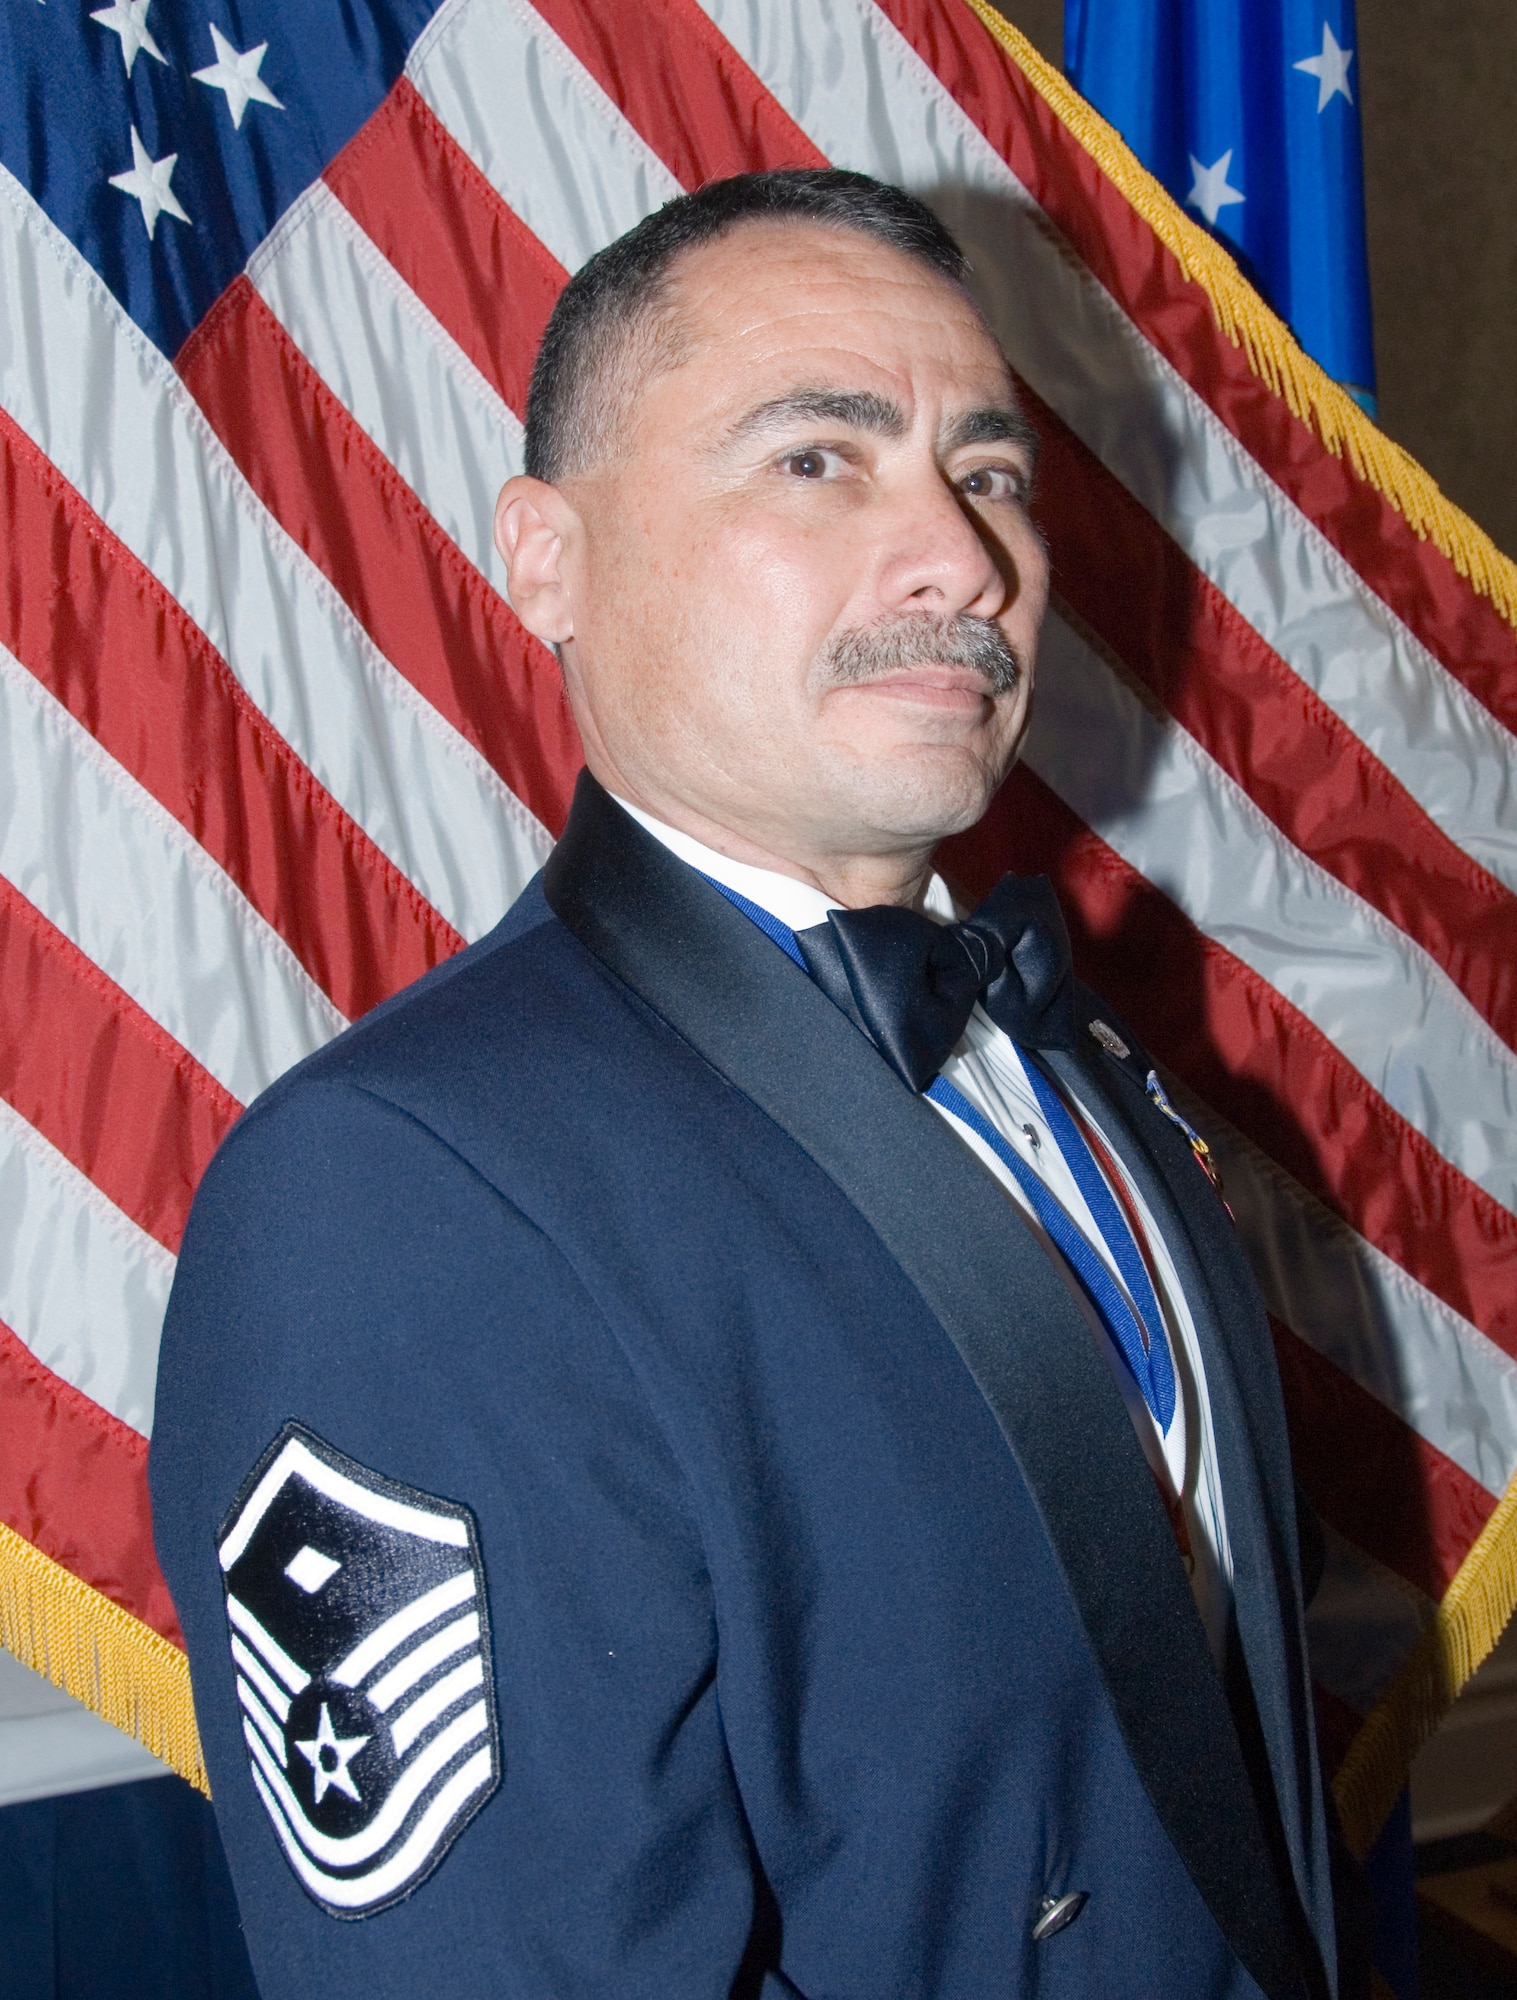 Master Sgt. Michael Diaz displays the "Diamond" he earned after completing the Air Force First Sergeants Academy at Gunter. Sergeant Diaz now returns to the 147th Mission Support Group at Ellington Field Joint Reserve Base in Houston, Texas where he will apply his new skills as the unit's "first shirt." (U.S. Air Force photo/Melissa Ojeda)